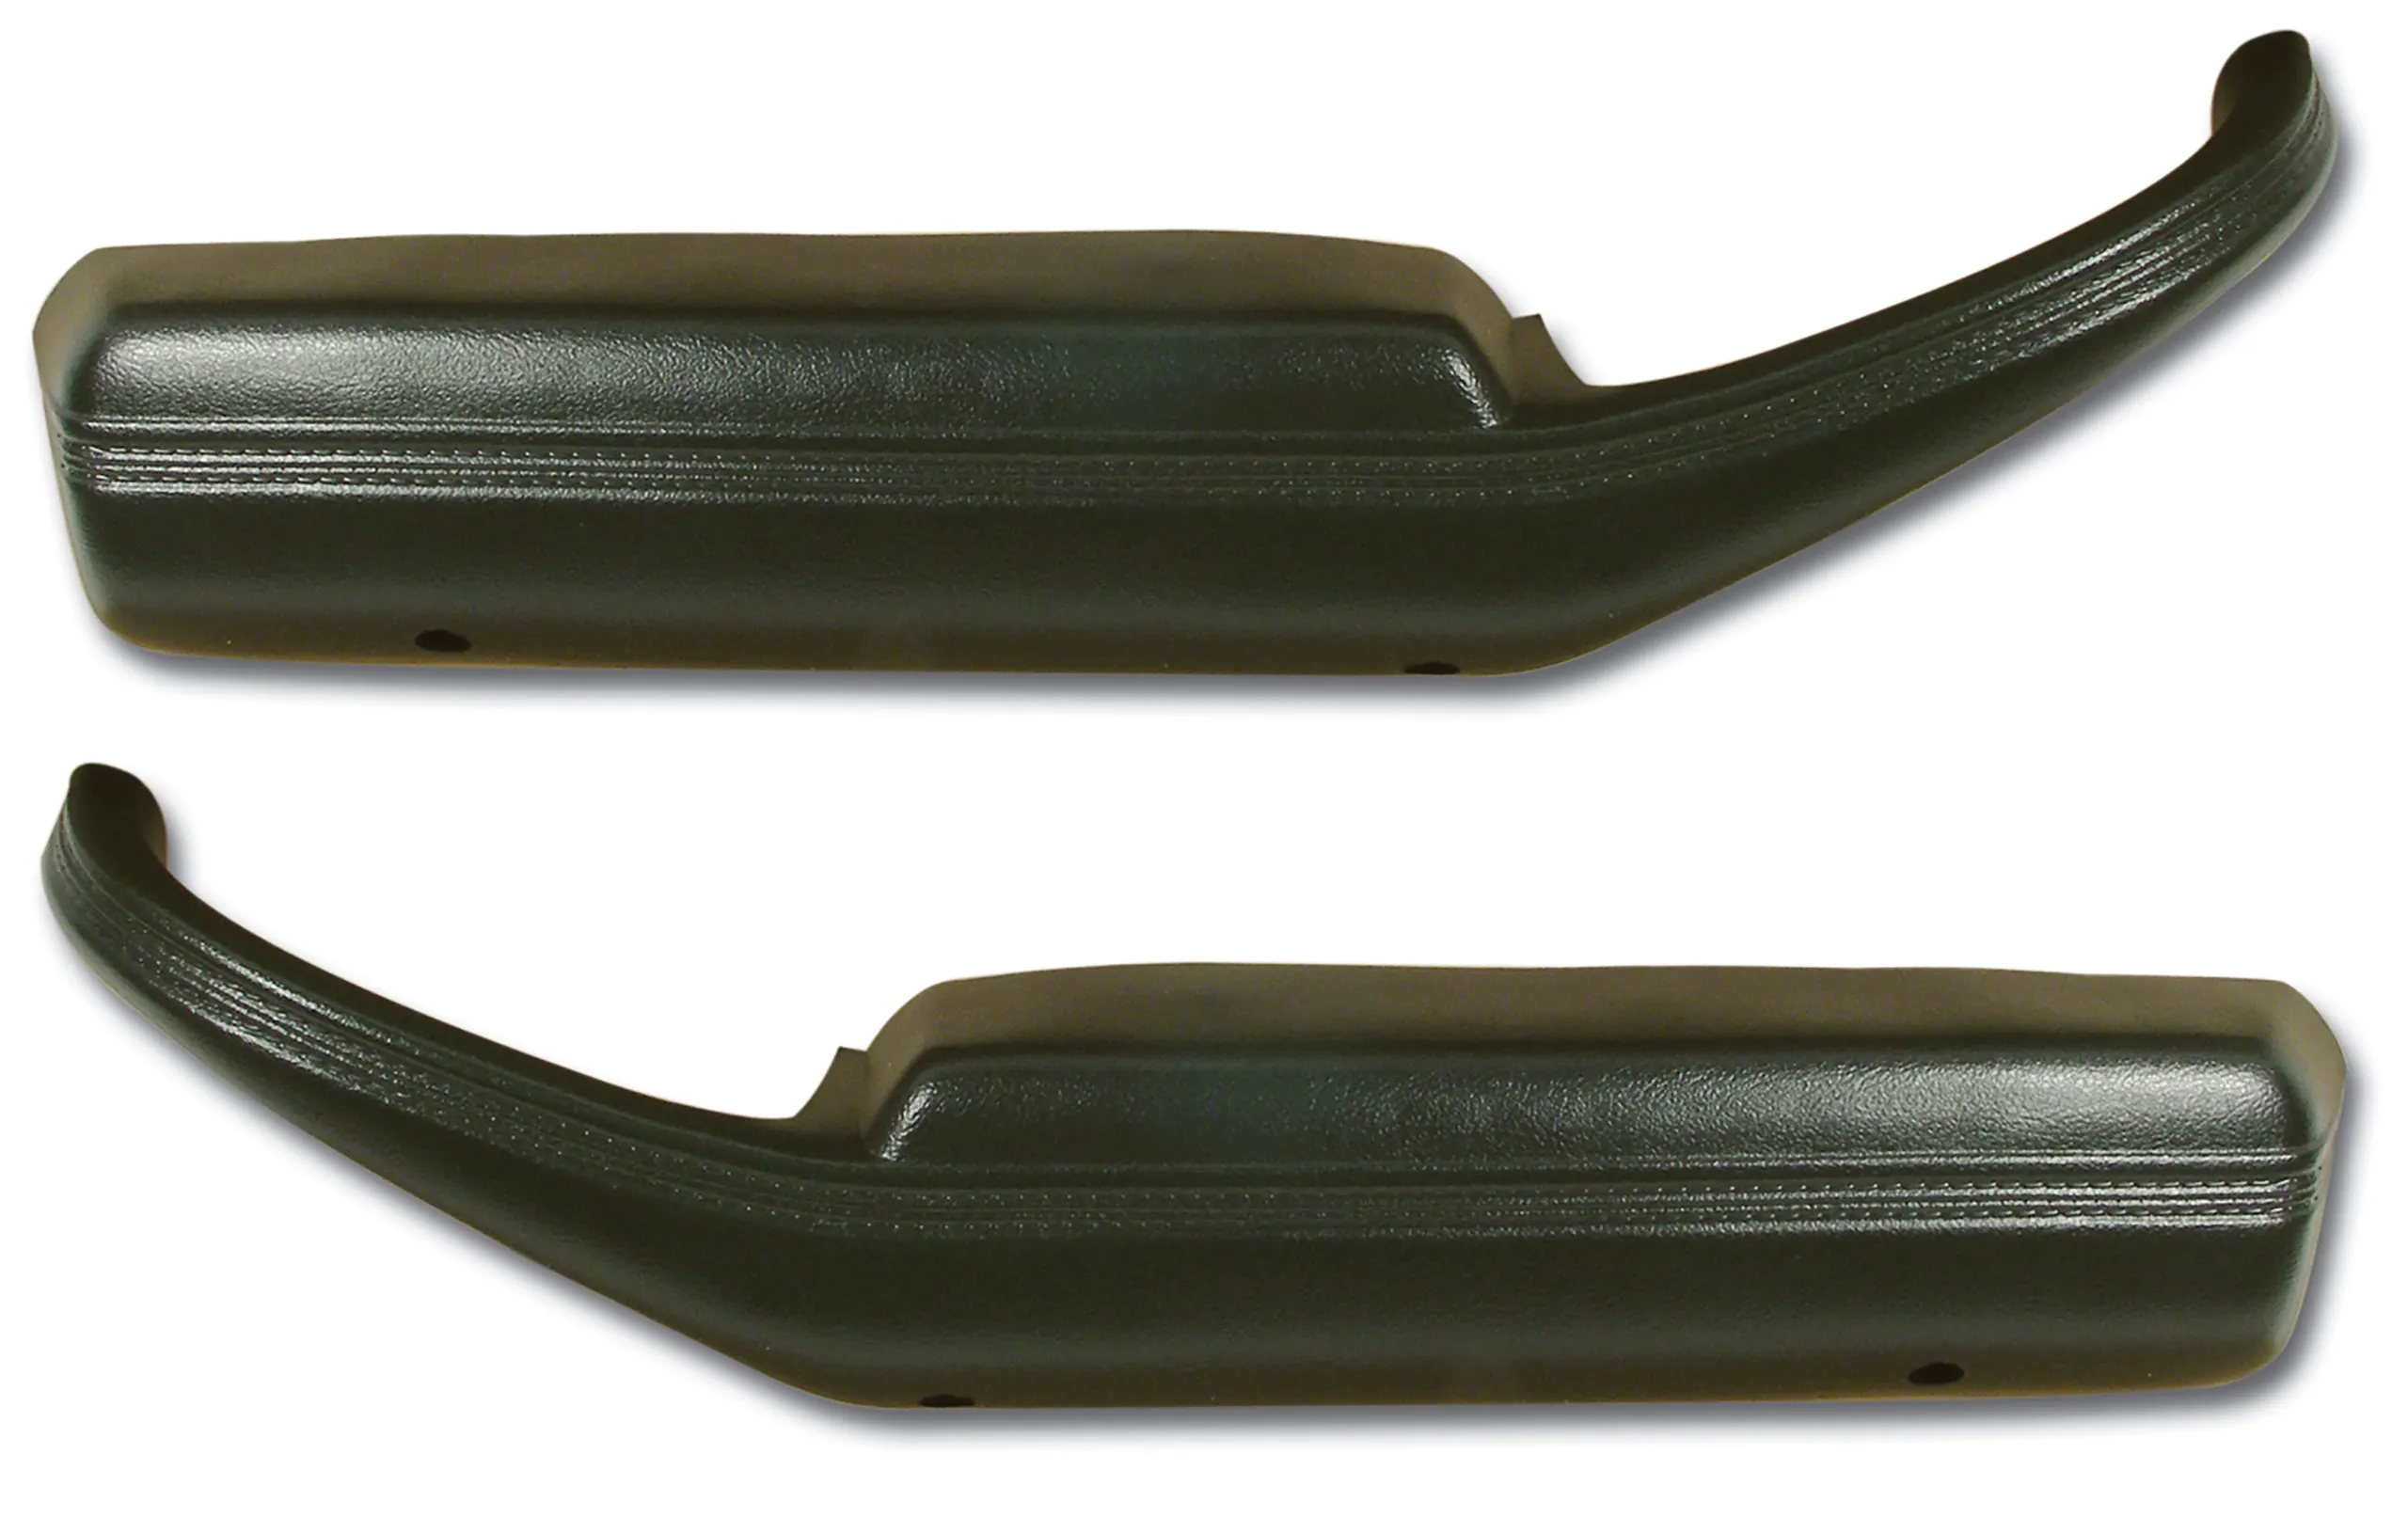 CA 1978-1982 Chevrolet Corvette Reproduction Door Panel Armrests - Sold In Pairs - Choose Year & Color